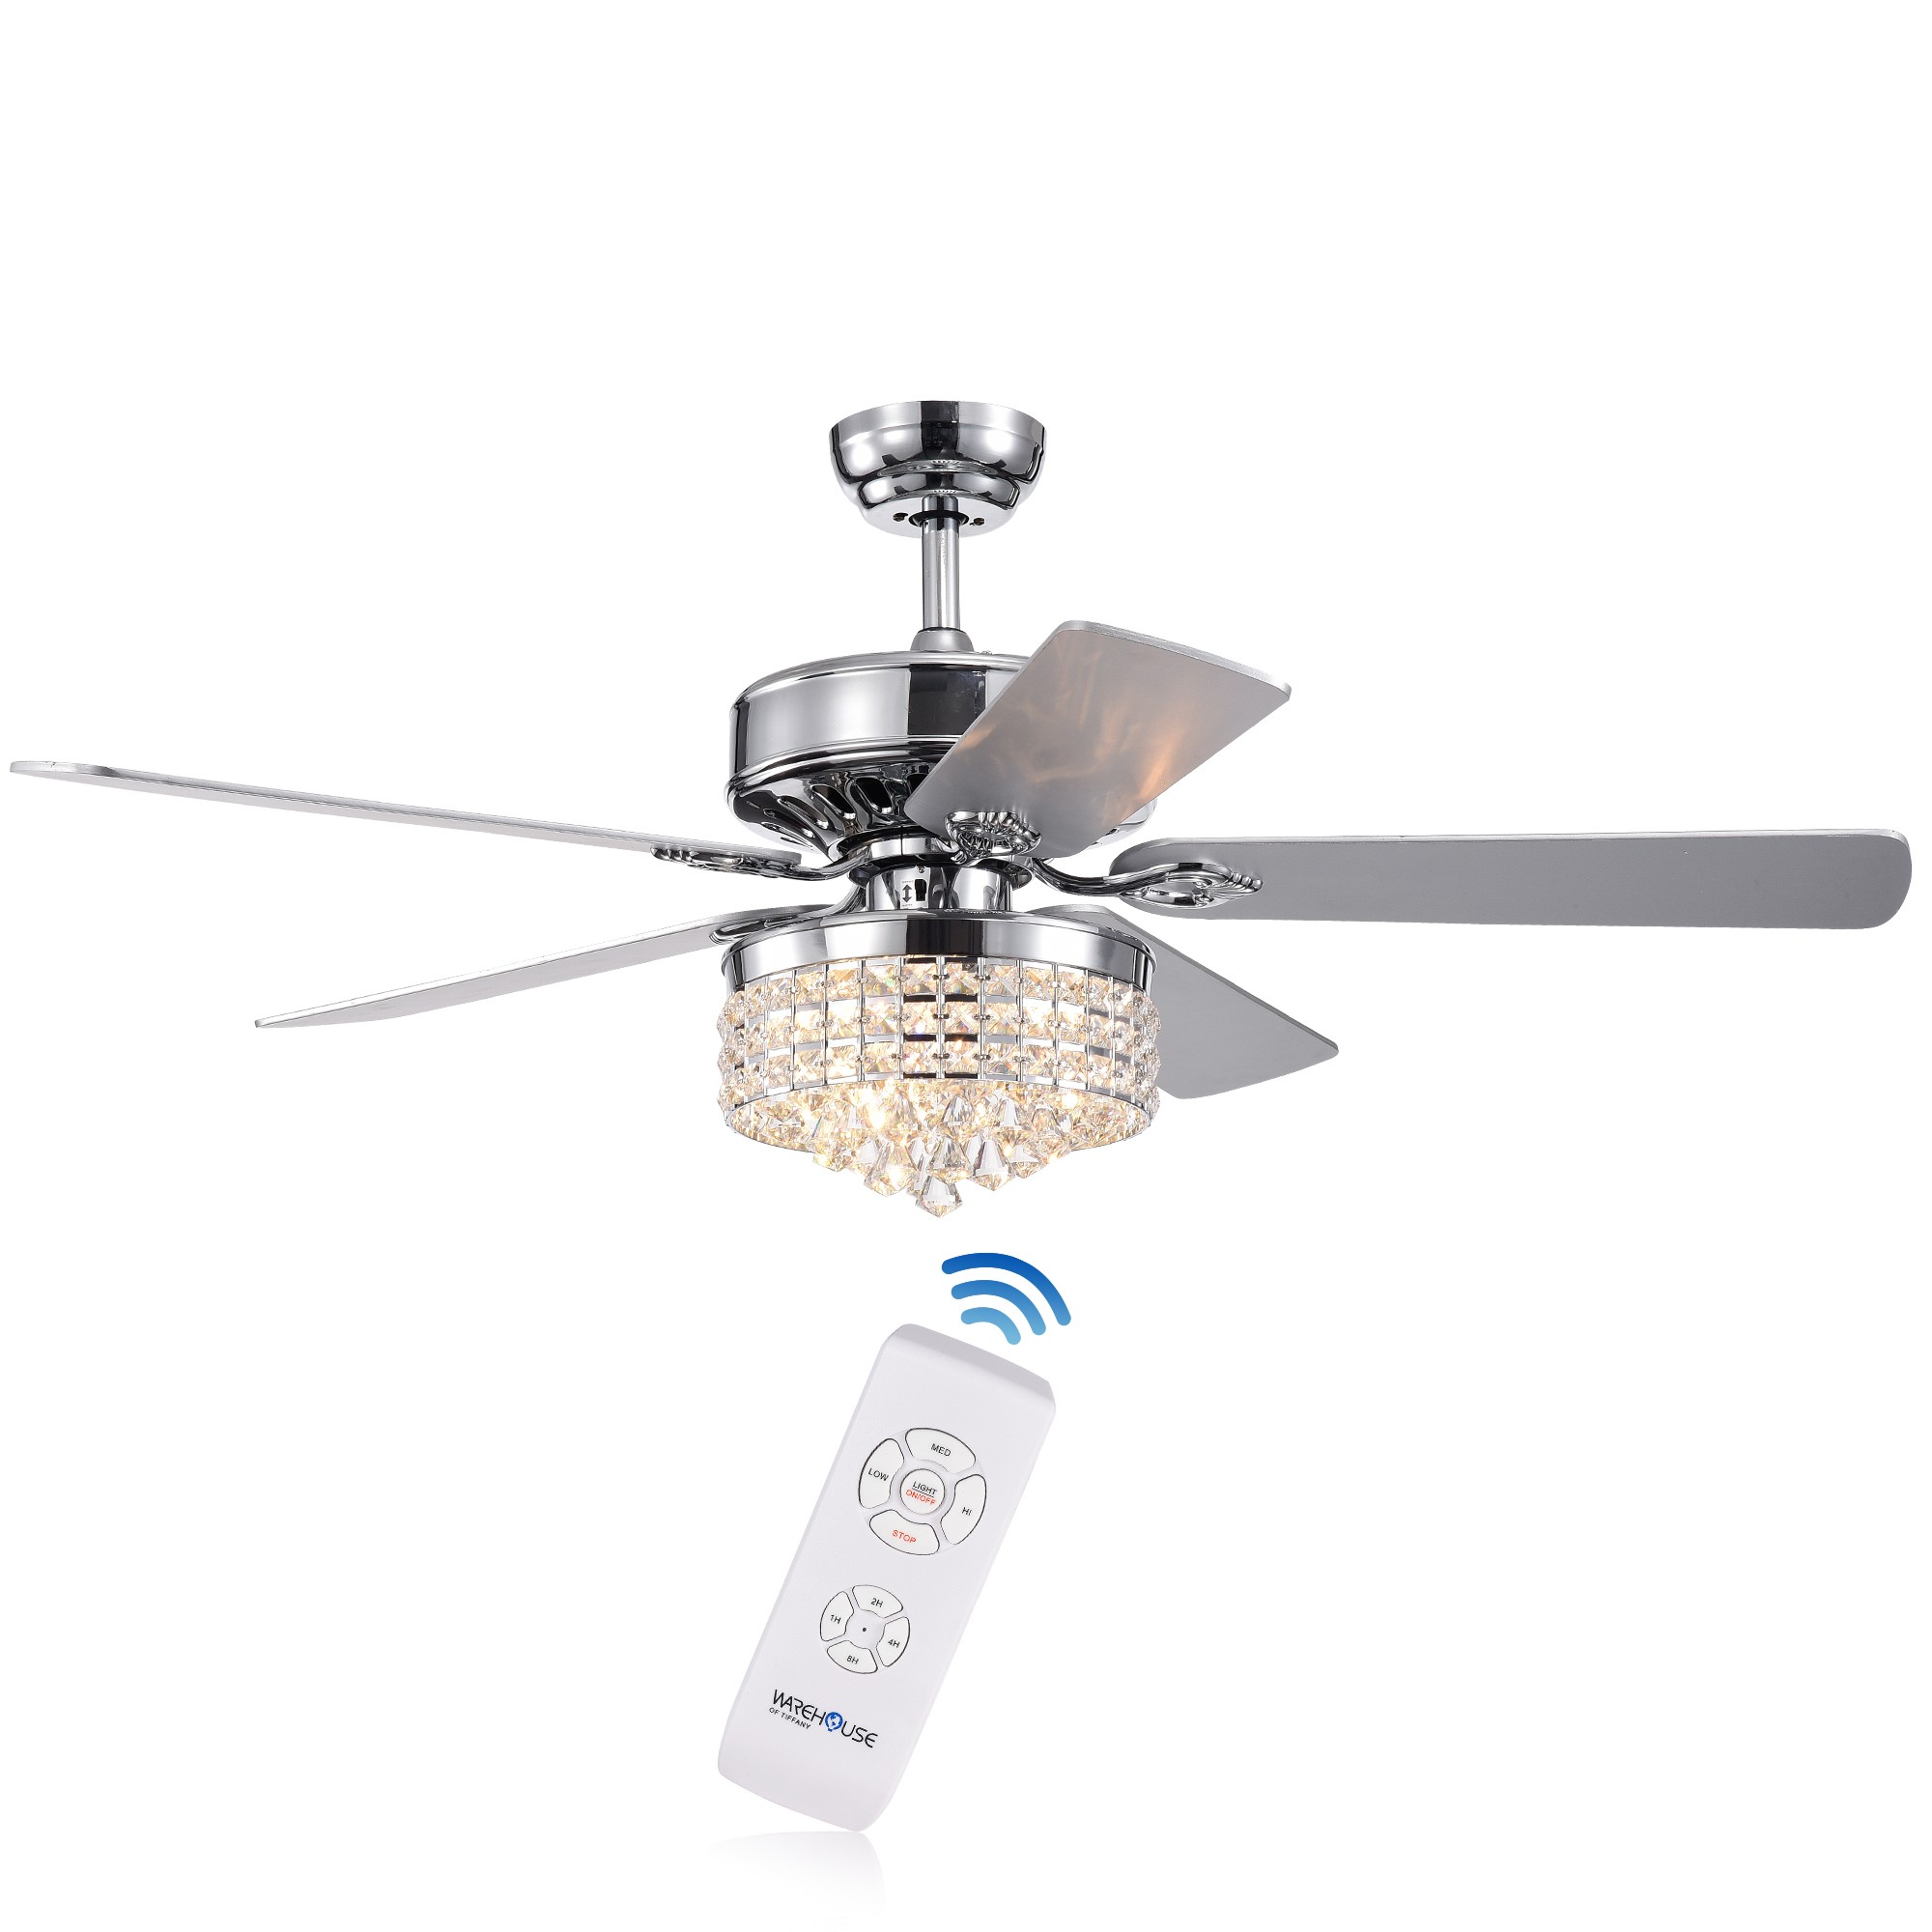 Letta Chrome 52-Inch 4-light 5-Blade Lighted Ceiling Fan Crystal Shade 2 Blade Colors (Optional Remote)